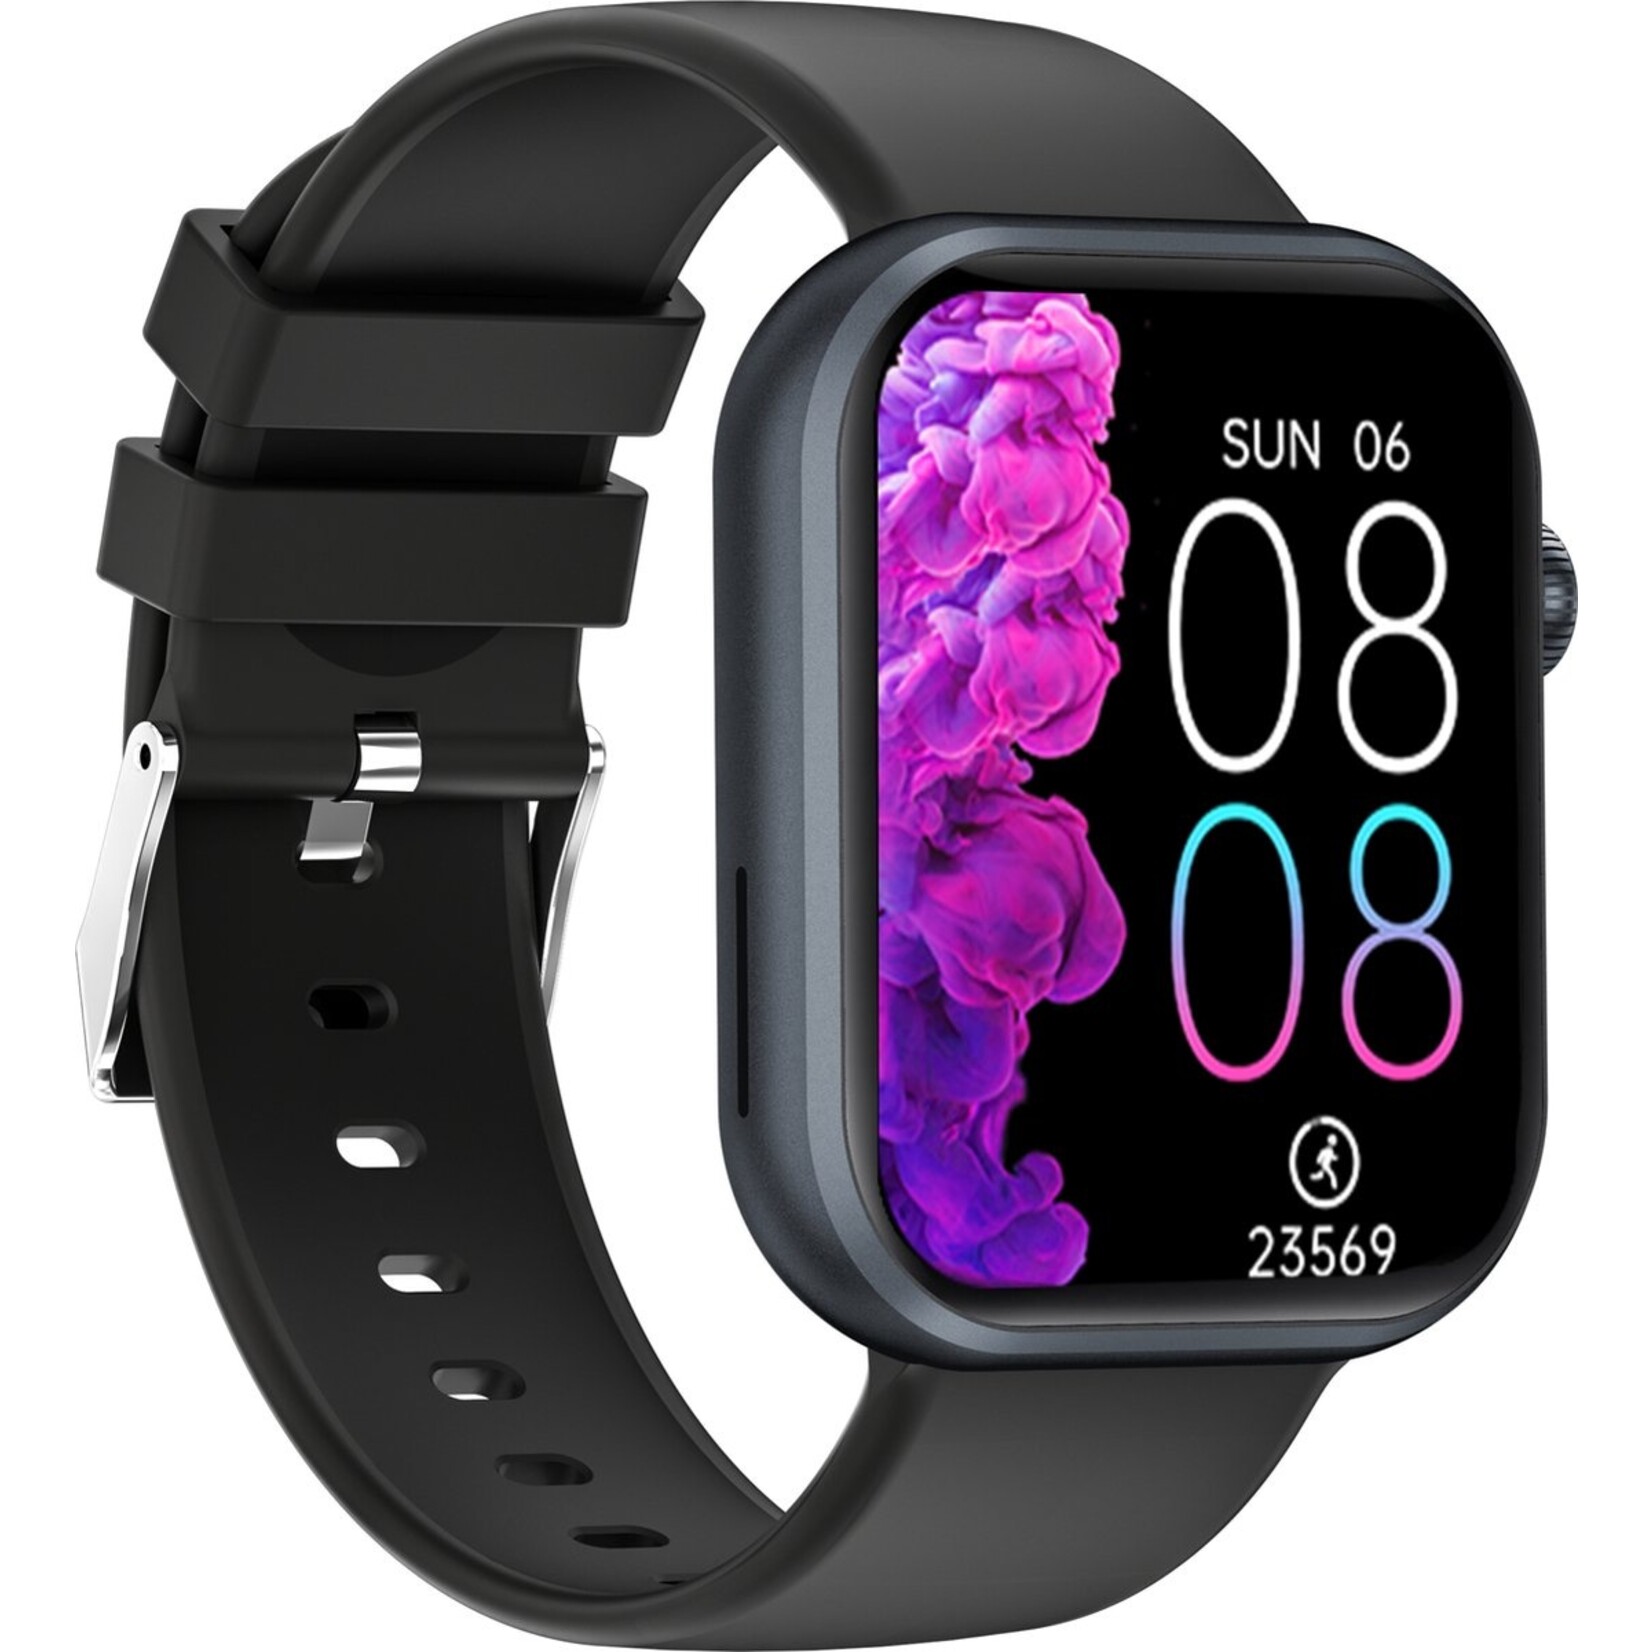 Dutch Wanted DutchWanted -  Black Smartwatch - 45,5mm - Silicone Band - For Women and Men - Pedometer - IOS and Android - Black